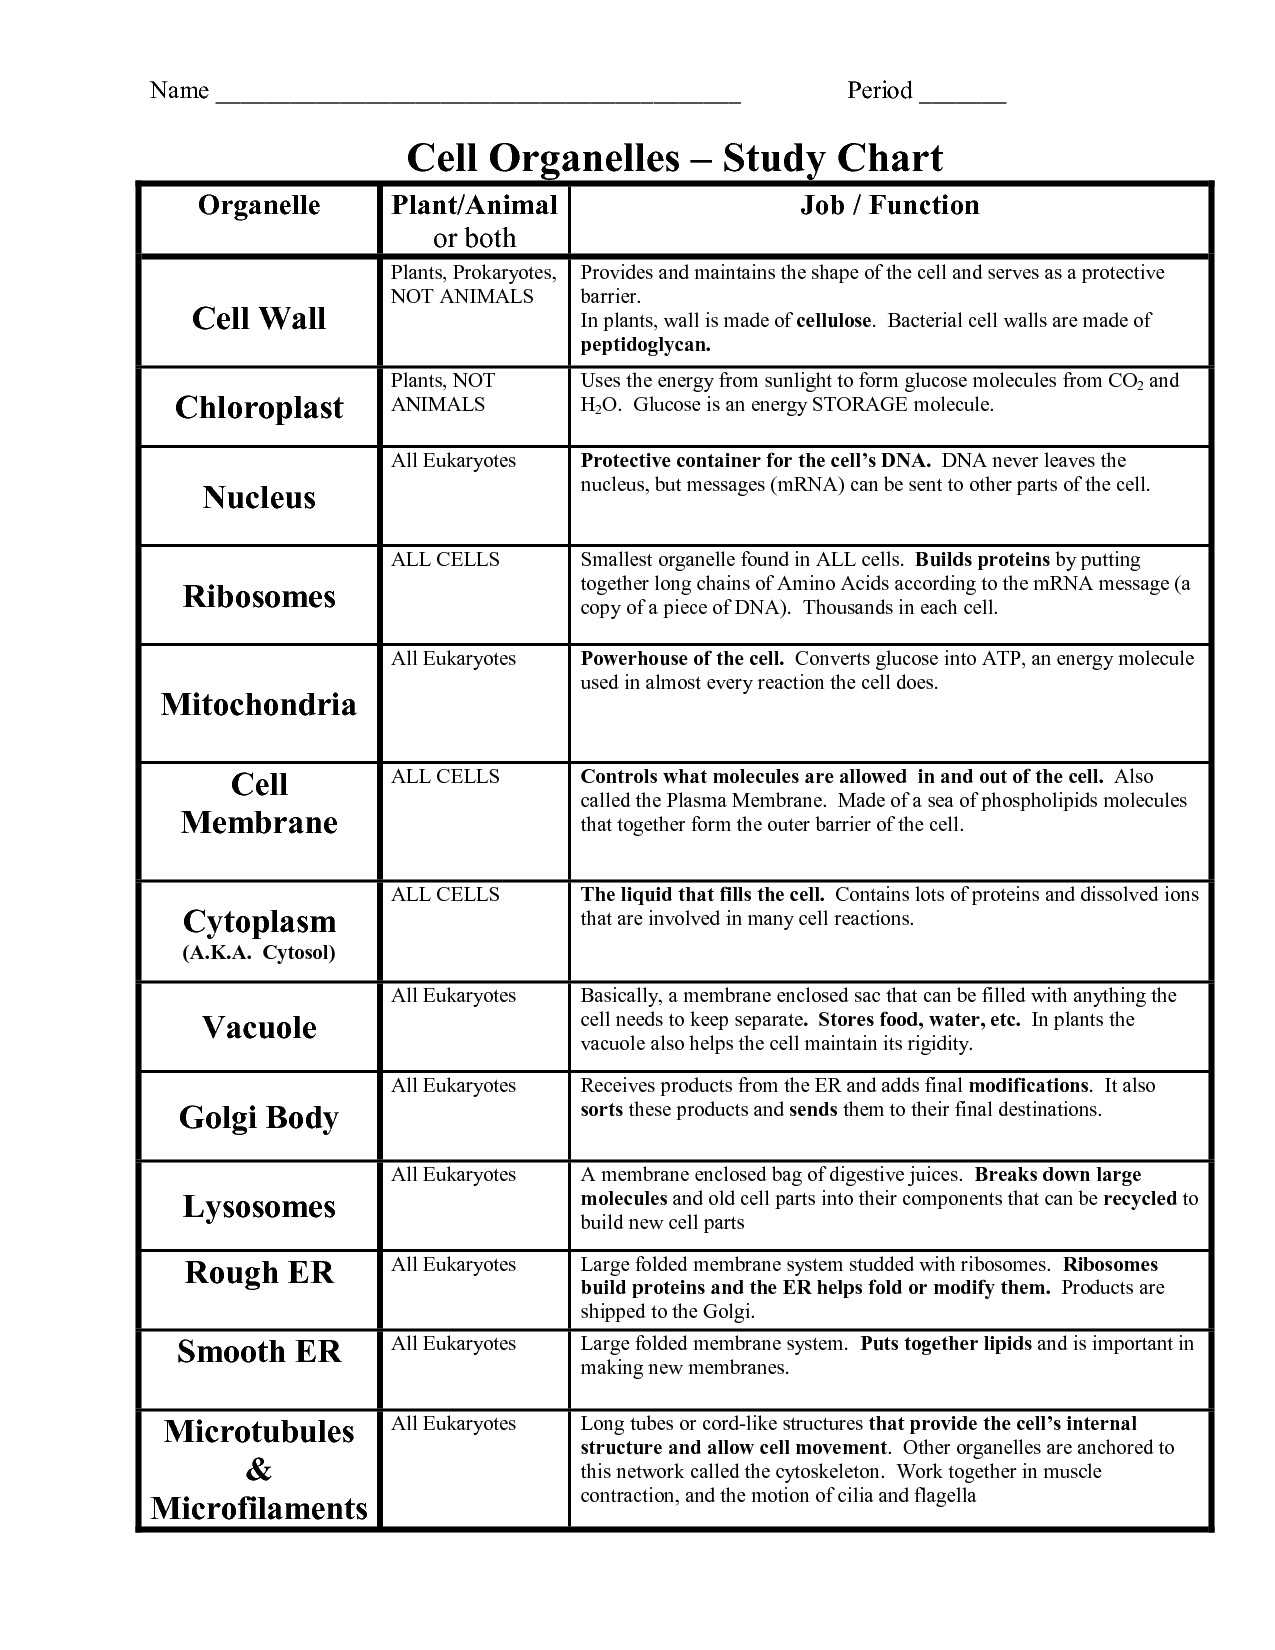 Chapter 7 Section 4 Cellular Transport Worksheet Answers Also Chapter 7 Cell Structure and Function Worksheet Answer Key New Dc